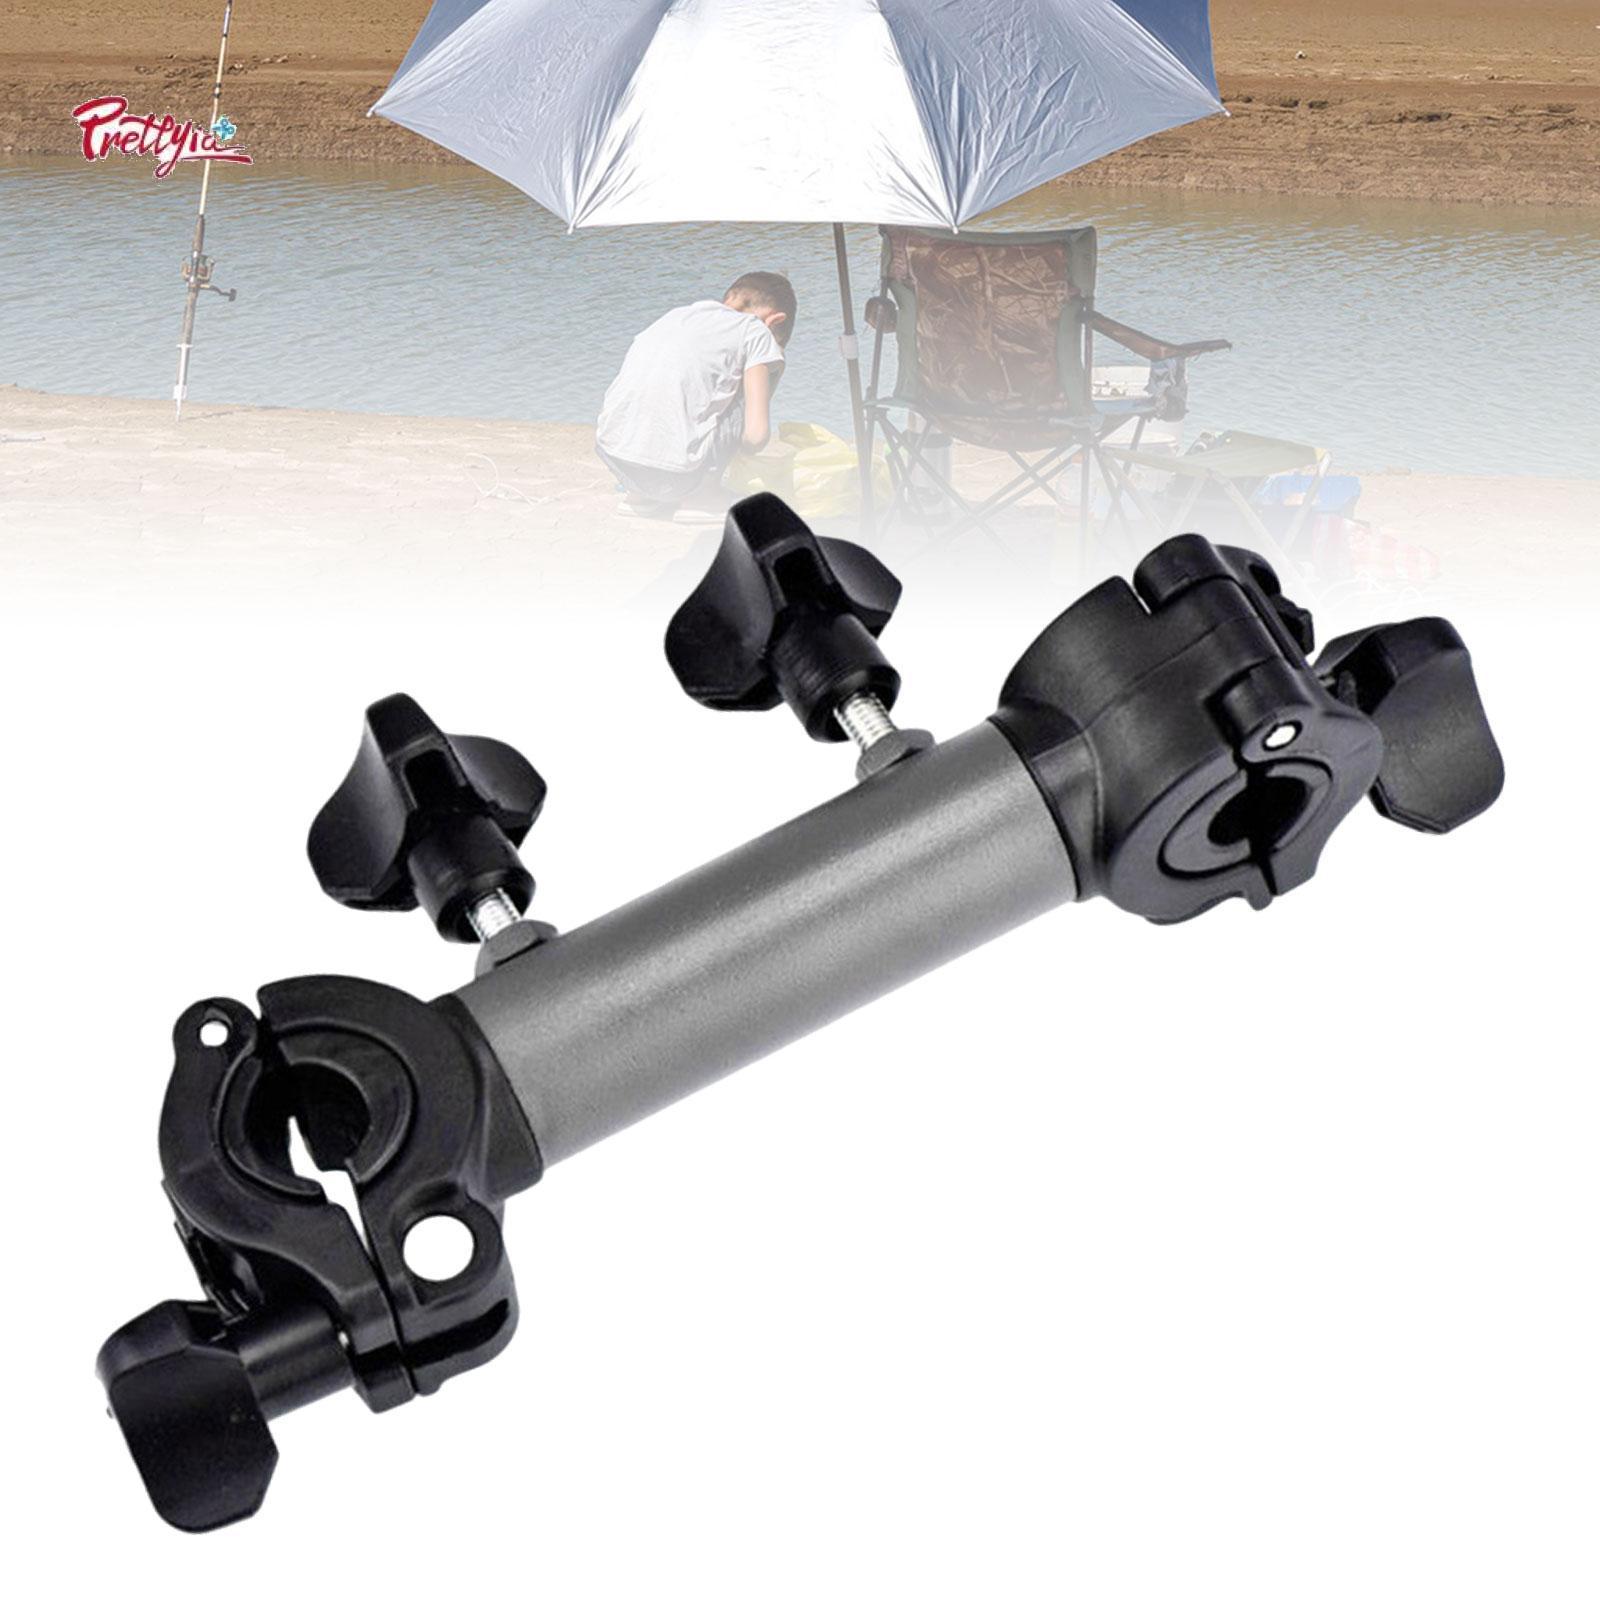 Prettyia Outdoor Leisure Umbrella Stand Holder Mount Sturdy for 0.6